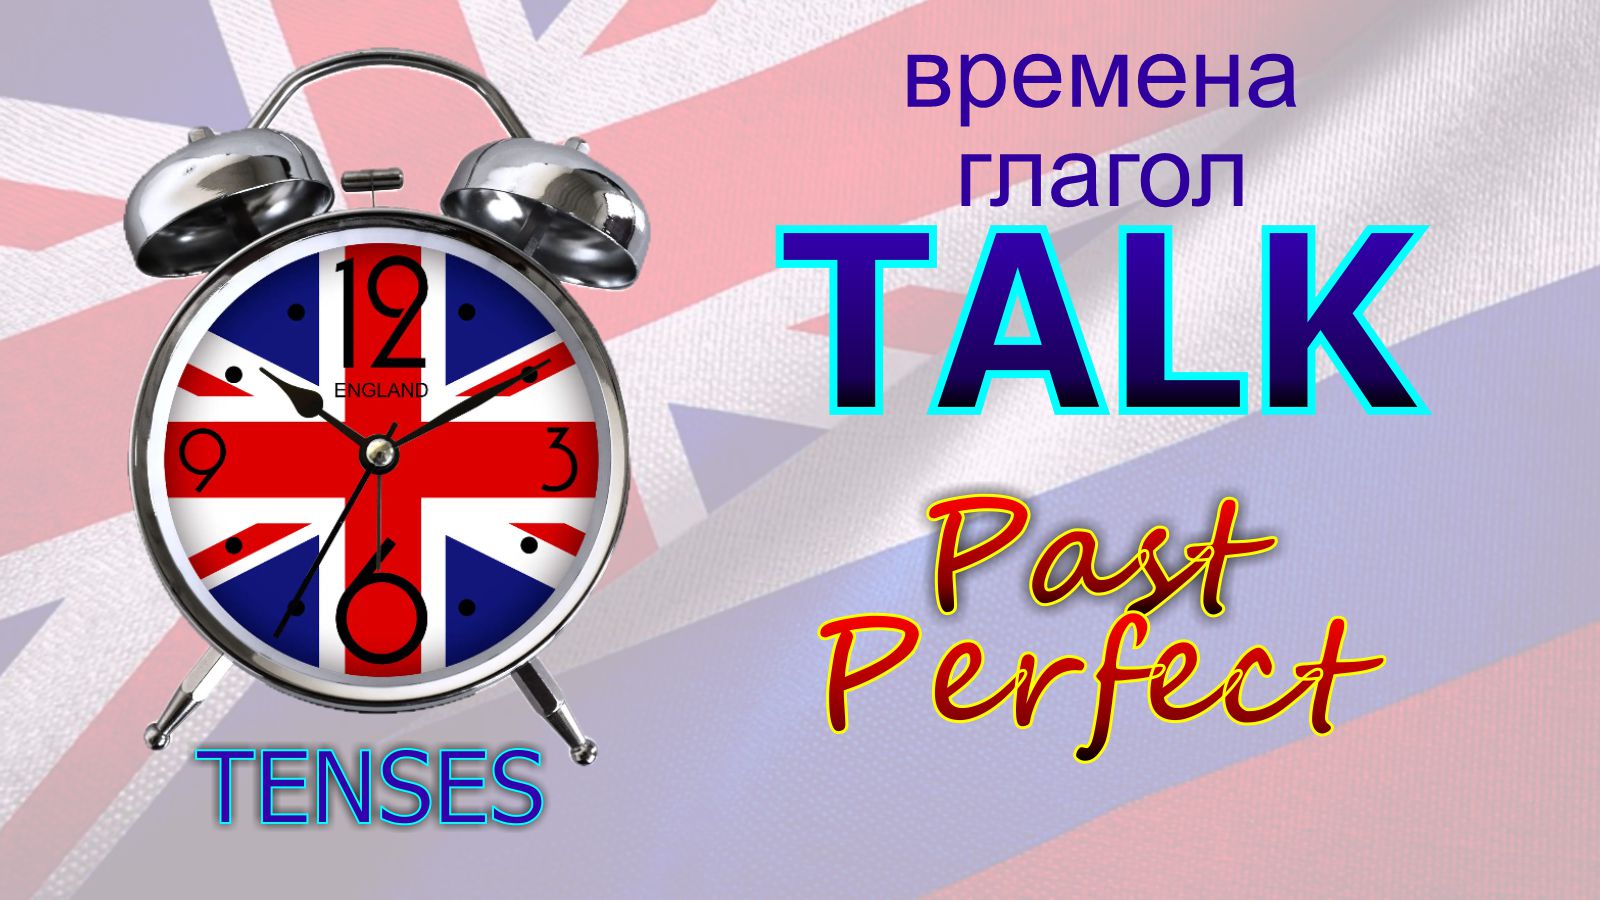 Времена. Глагол to TALK. Past Perfect